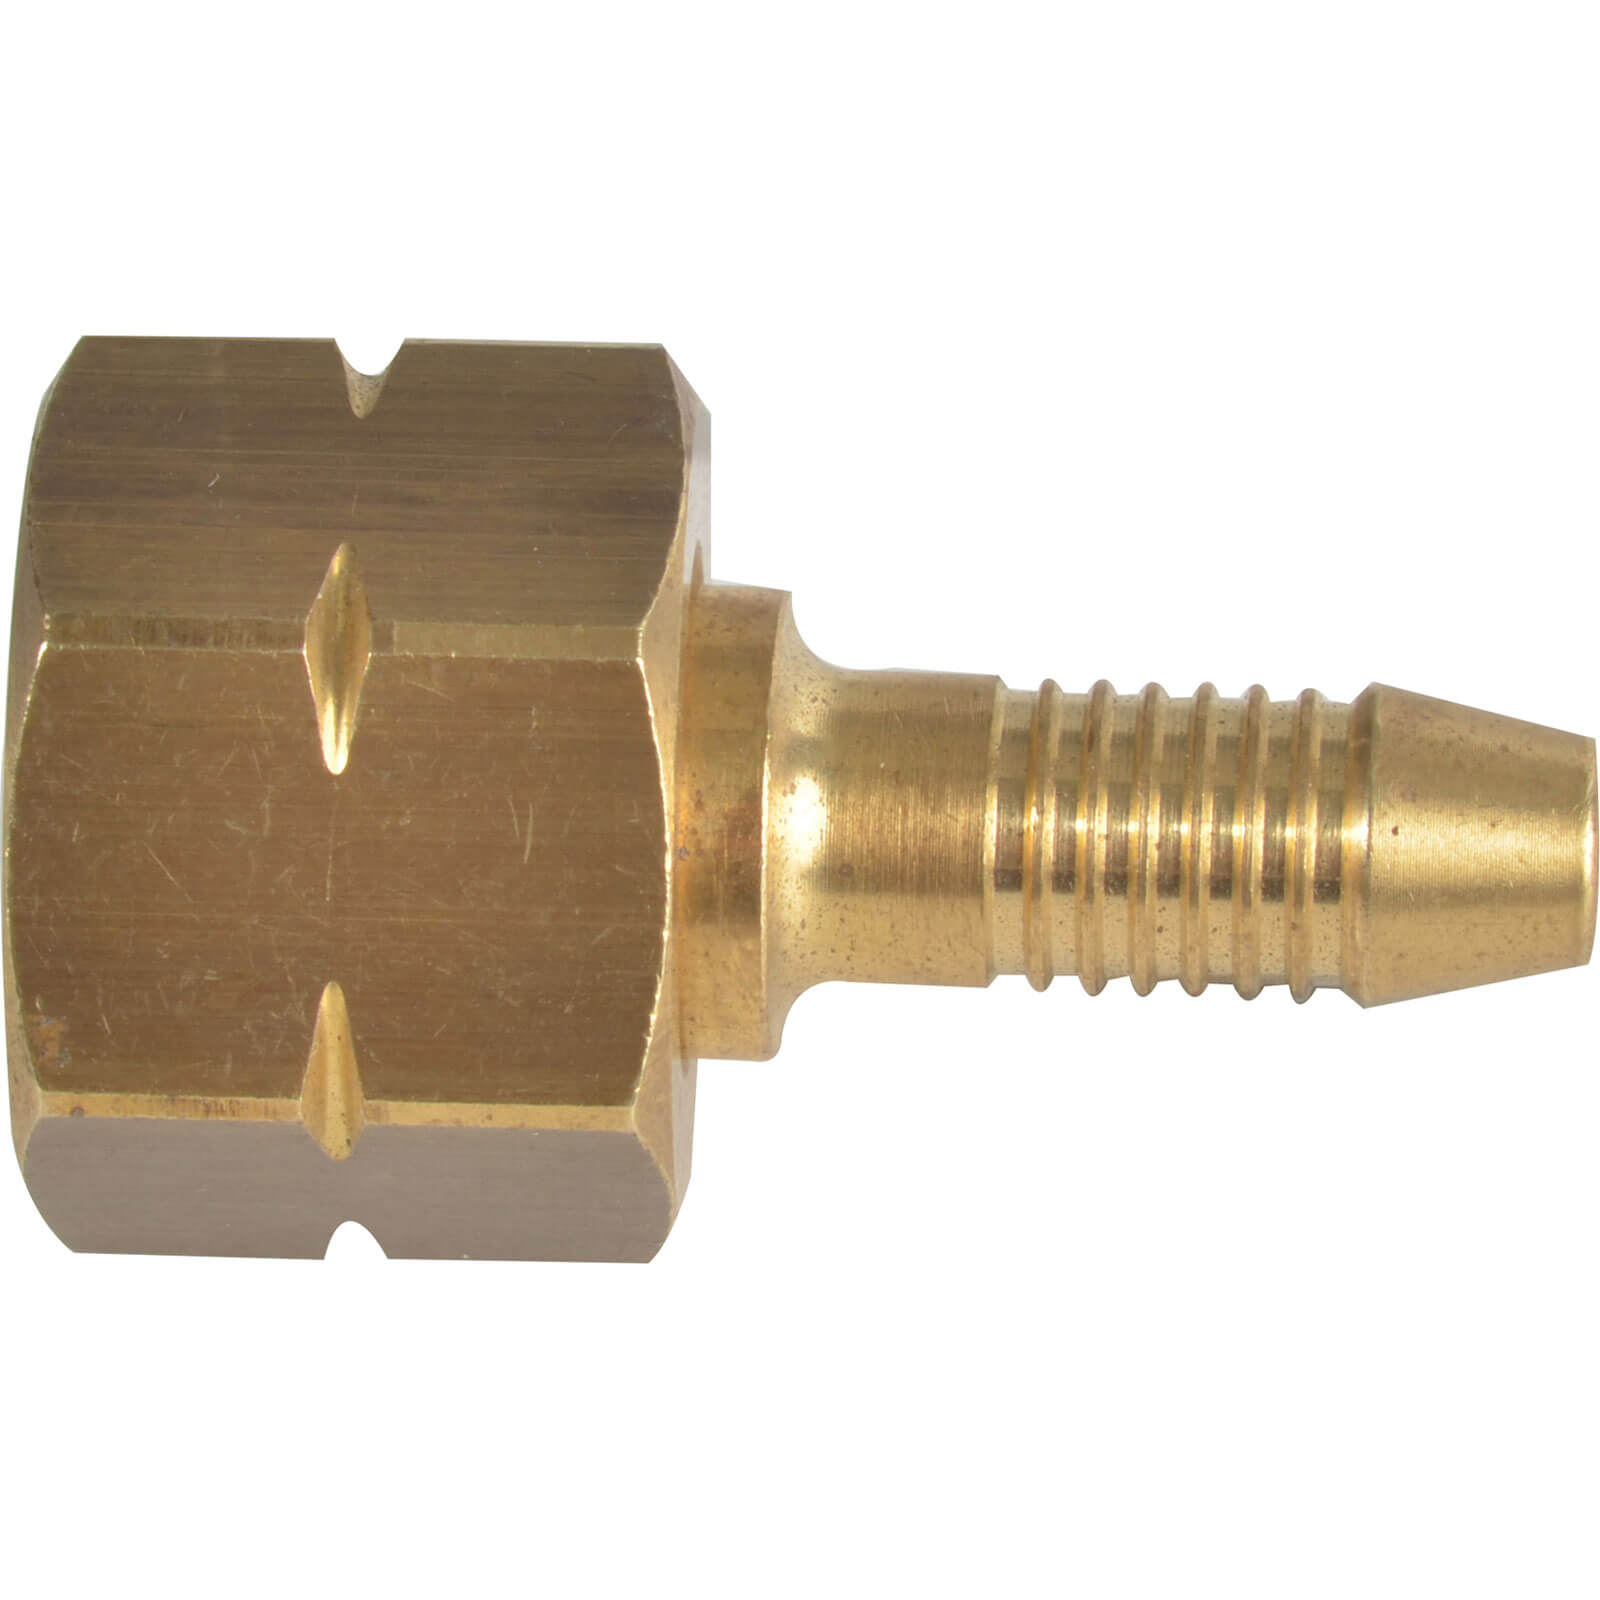 Image of Sievert 3/8" Left Hand Nut with 6mm Tail LPG Hose Connector